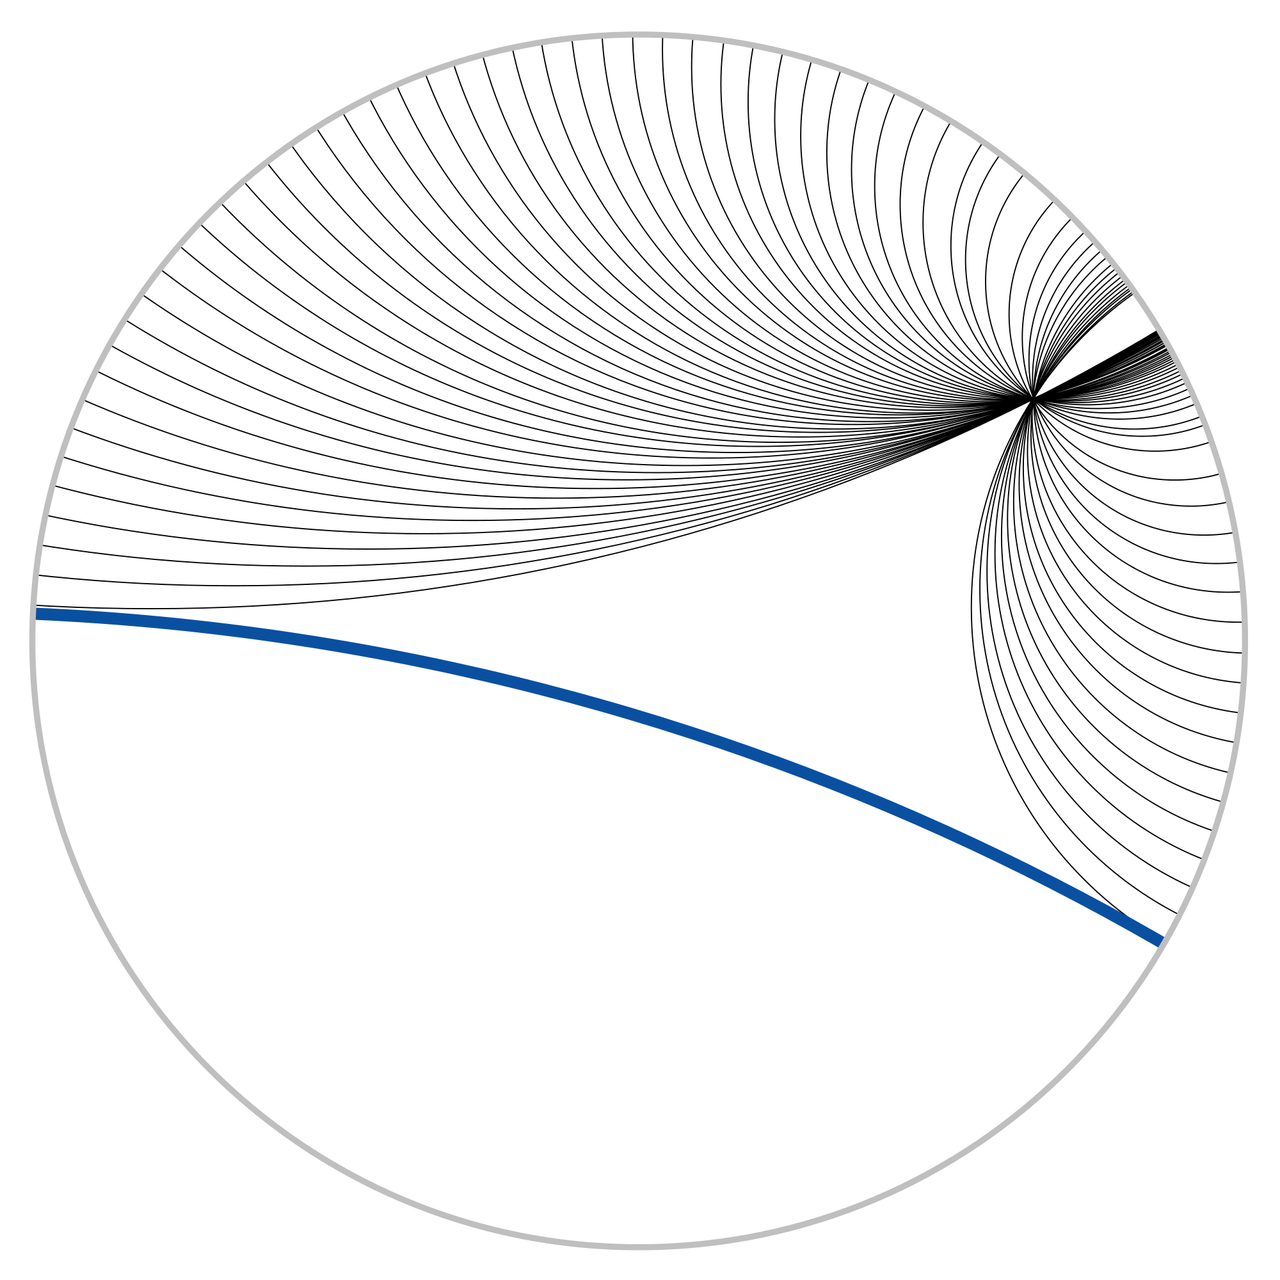 Hyperbolic parallel lines that do not intersect on the Poincaré disk.